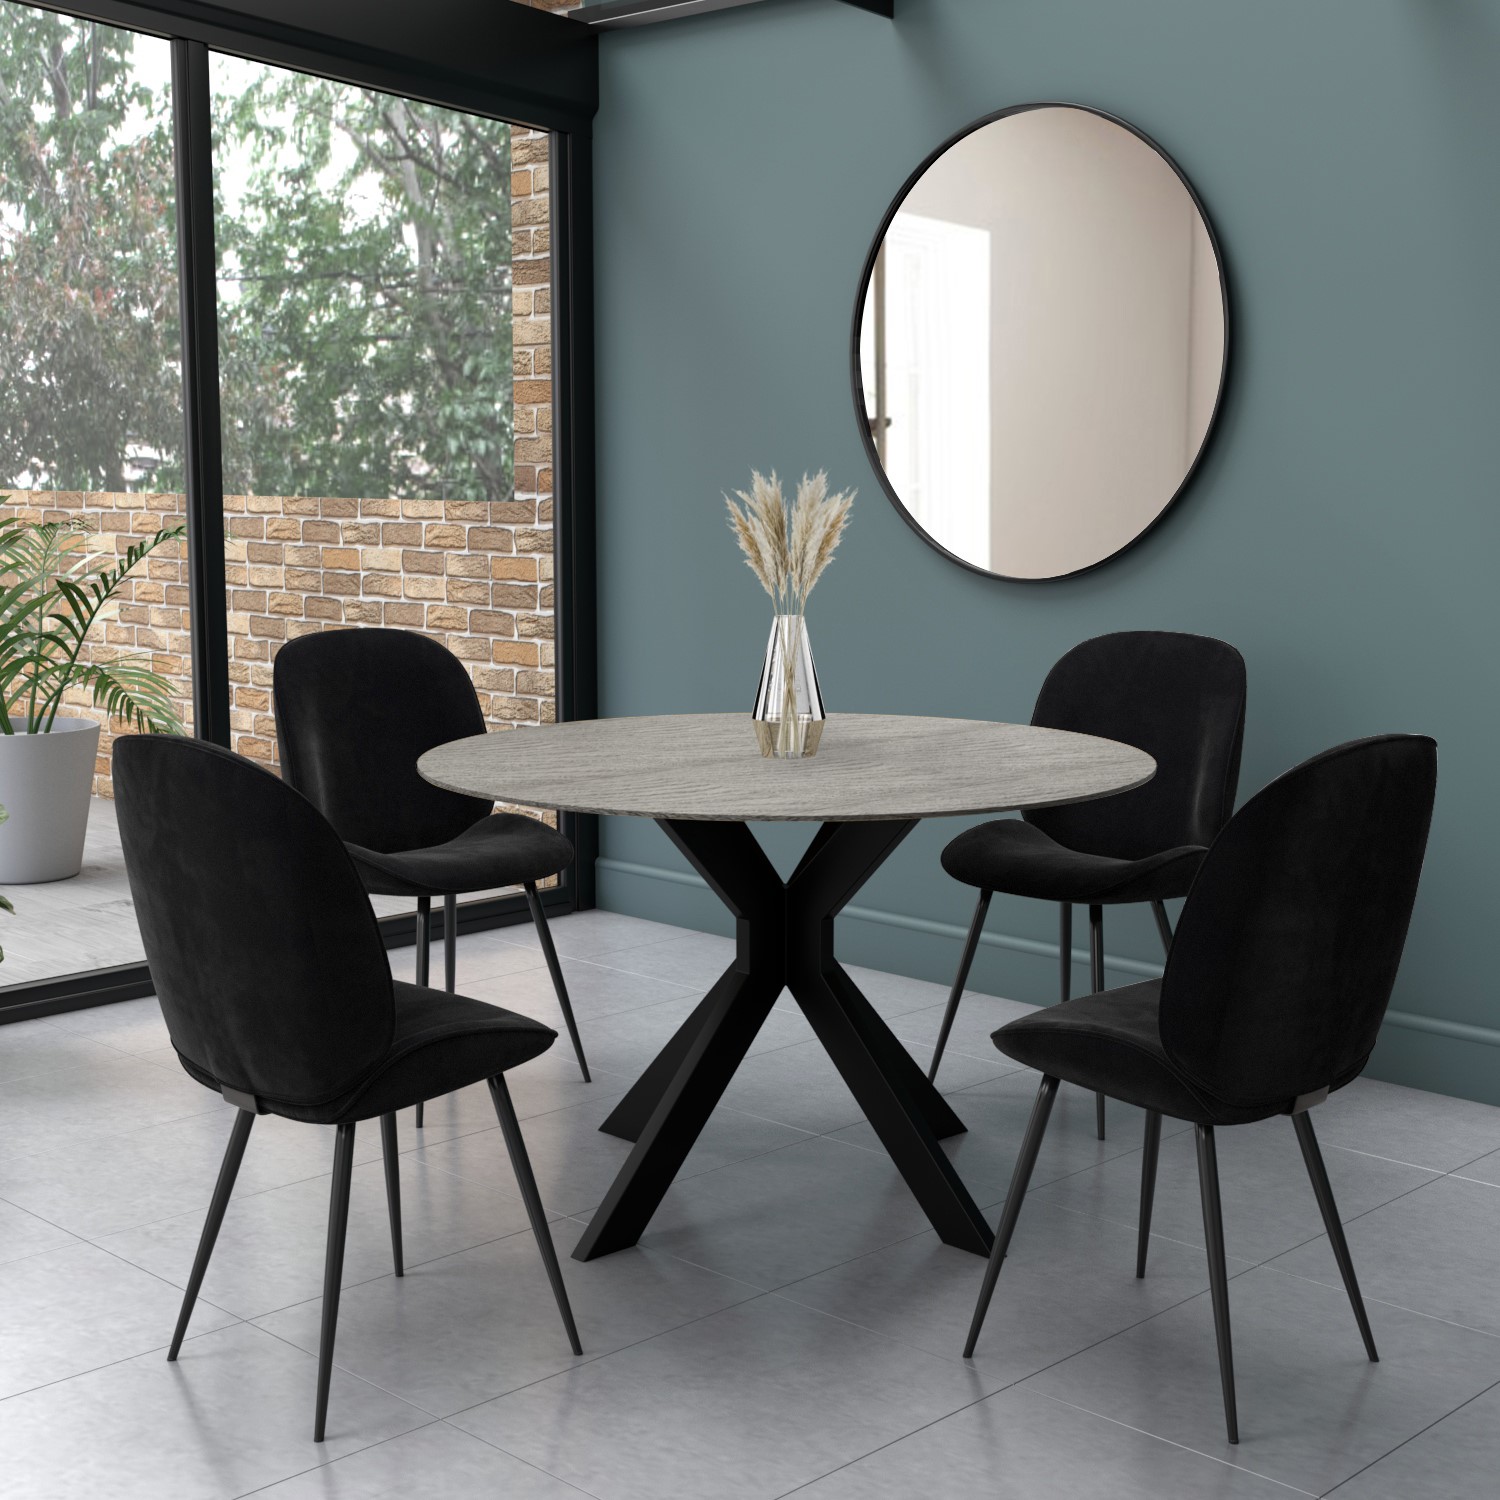 Round Grey Drop Leaf Dining Table With, Round Drop Leaf Dining Table And 4 Chairs